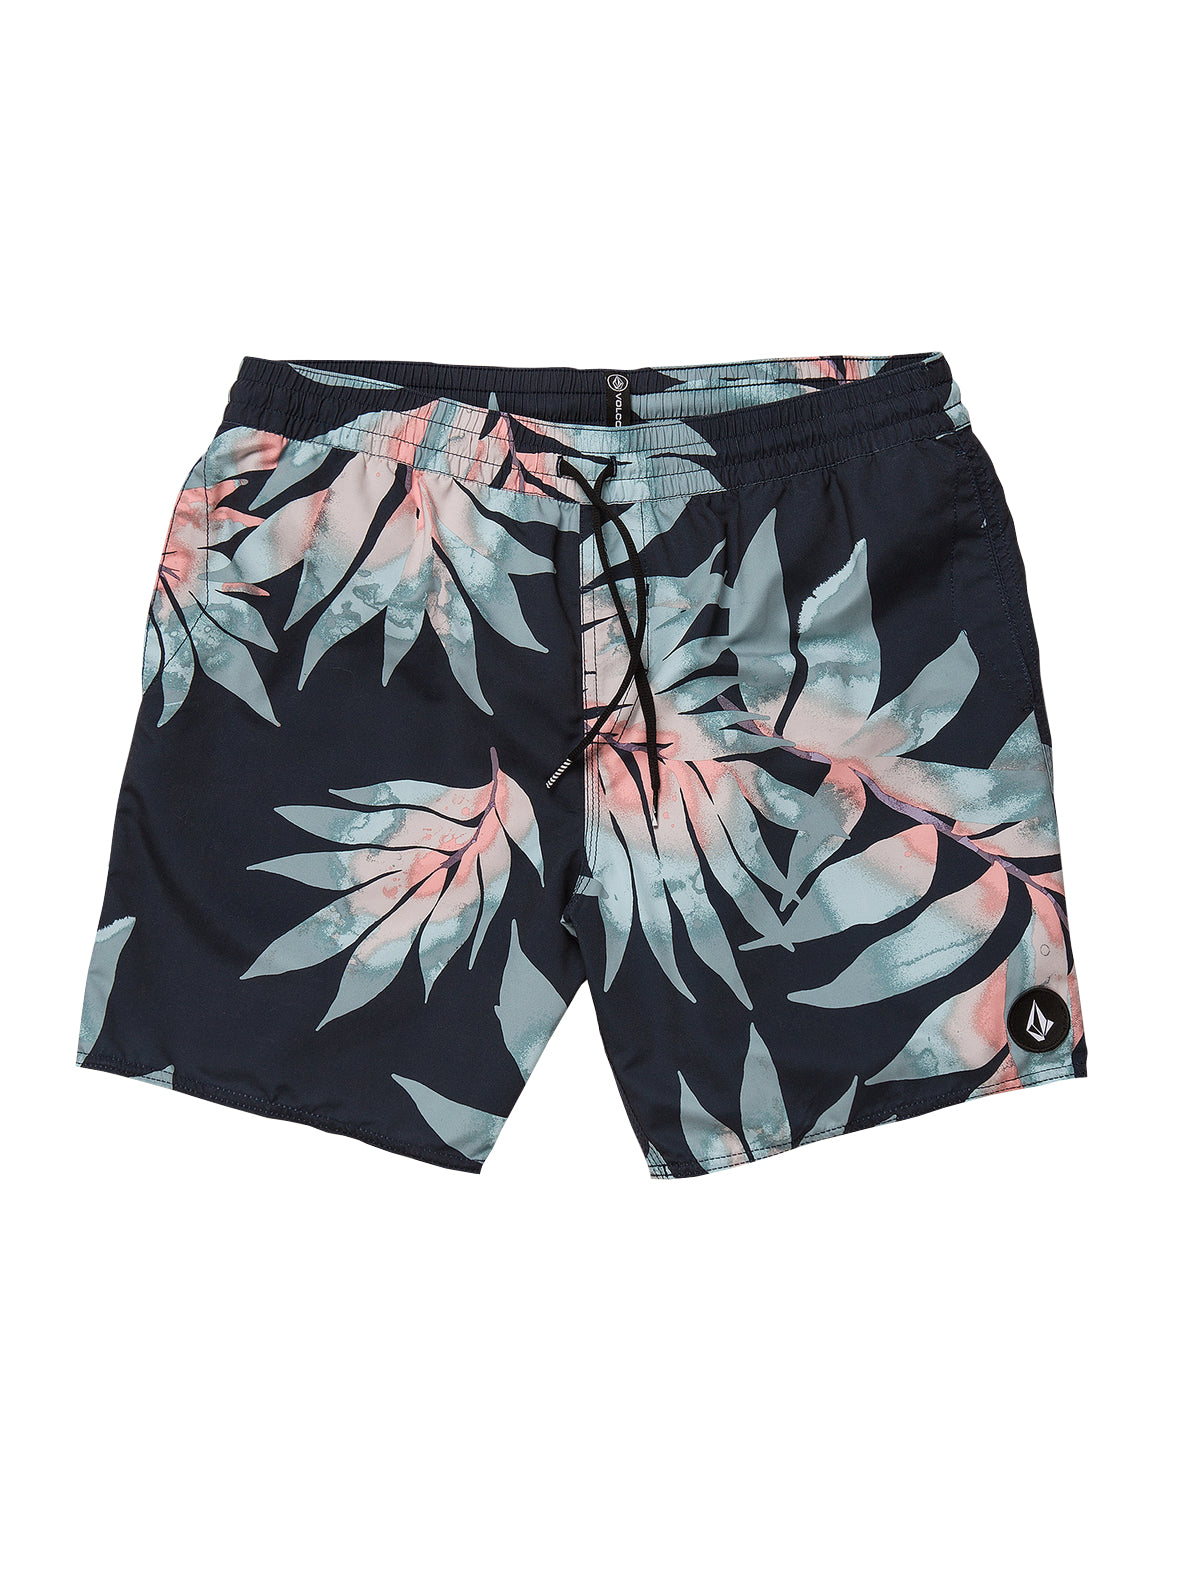 VOLCOM POLLY PACK TRUNK 17 NVY S